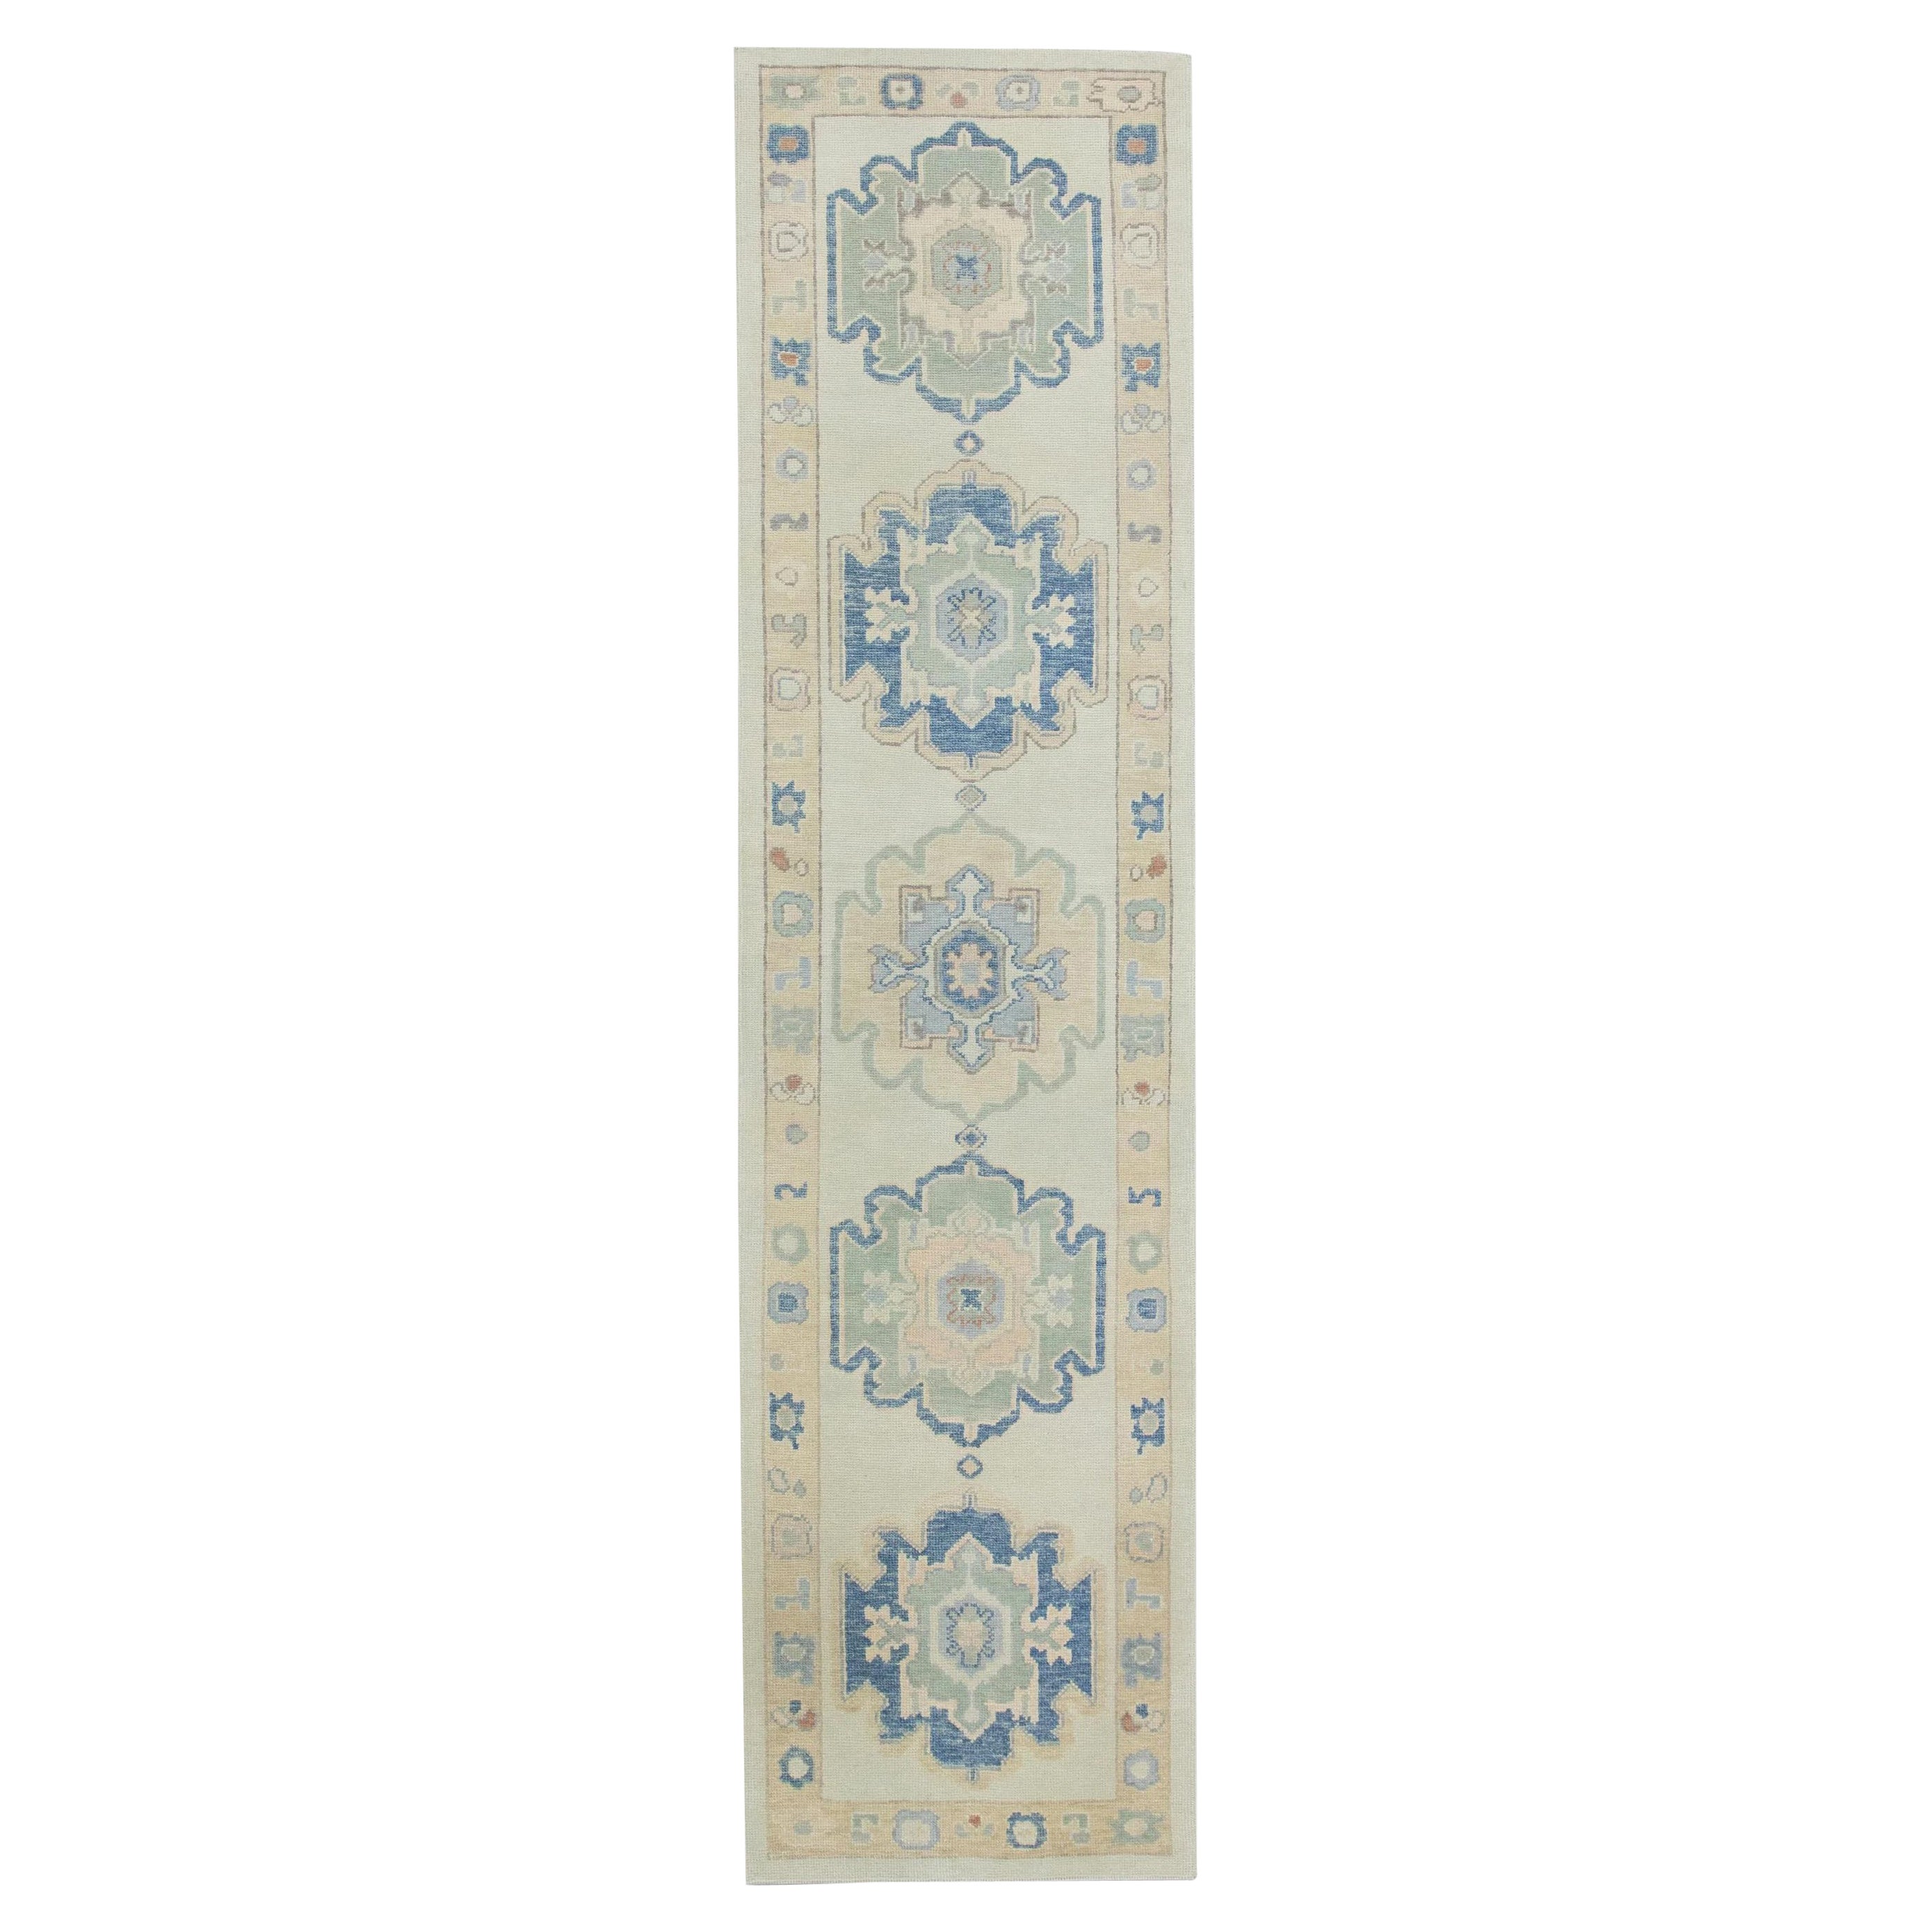 Blue & Yellow Floral Design Handwoven Wool Turkish Oushak Runner 3' X 11'9" For Sale